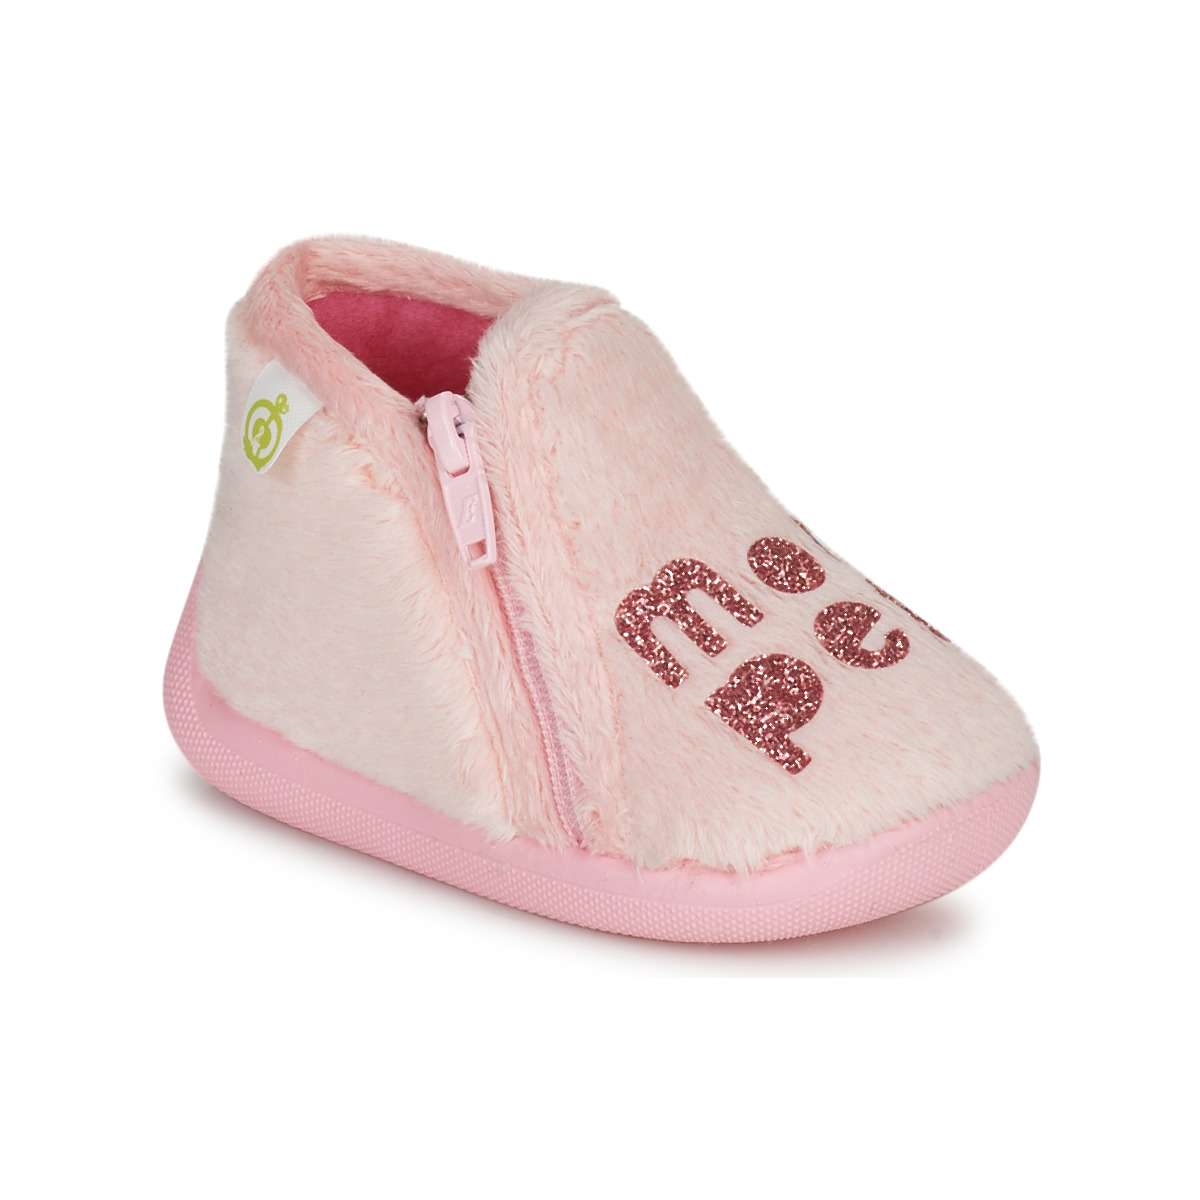 Chaussures Fille Doublure : Textile PRADS Rose